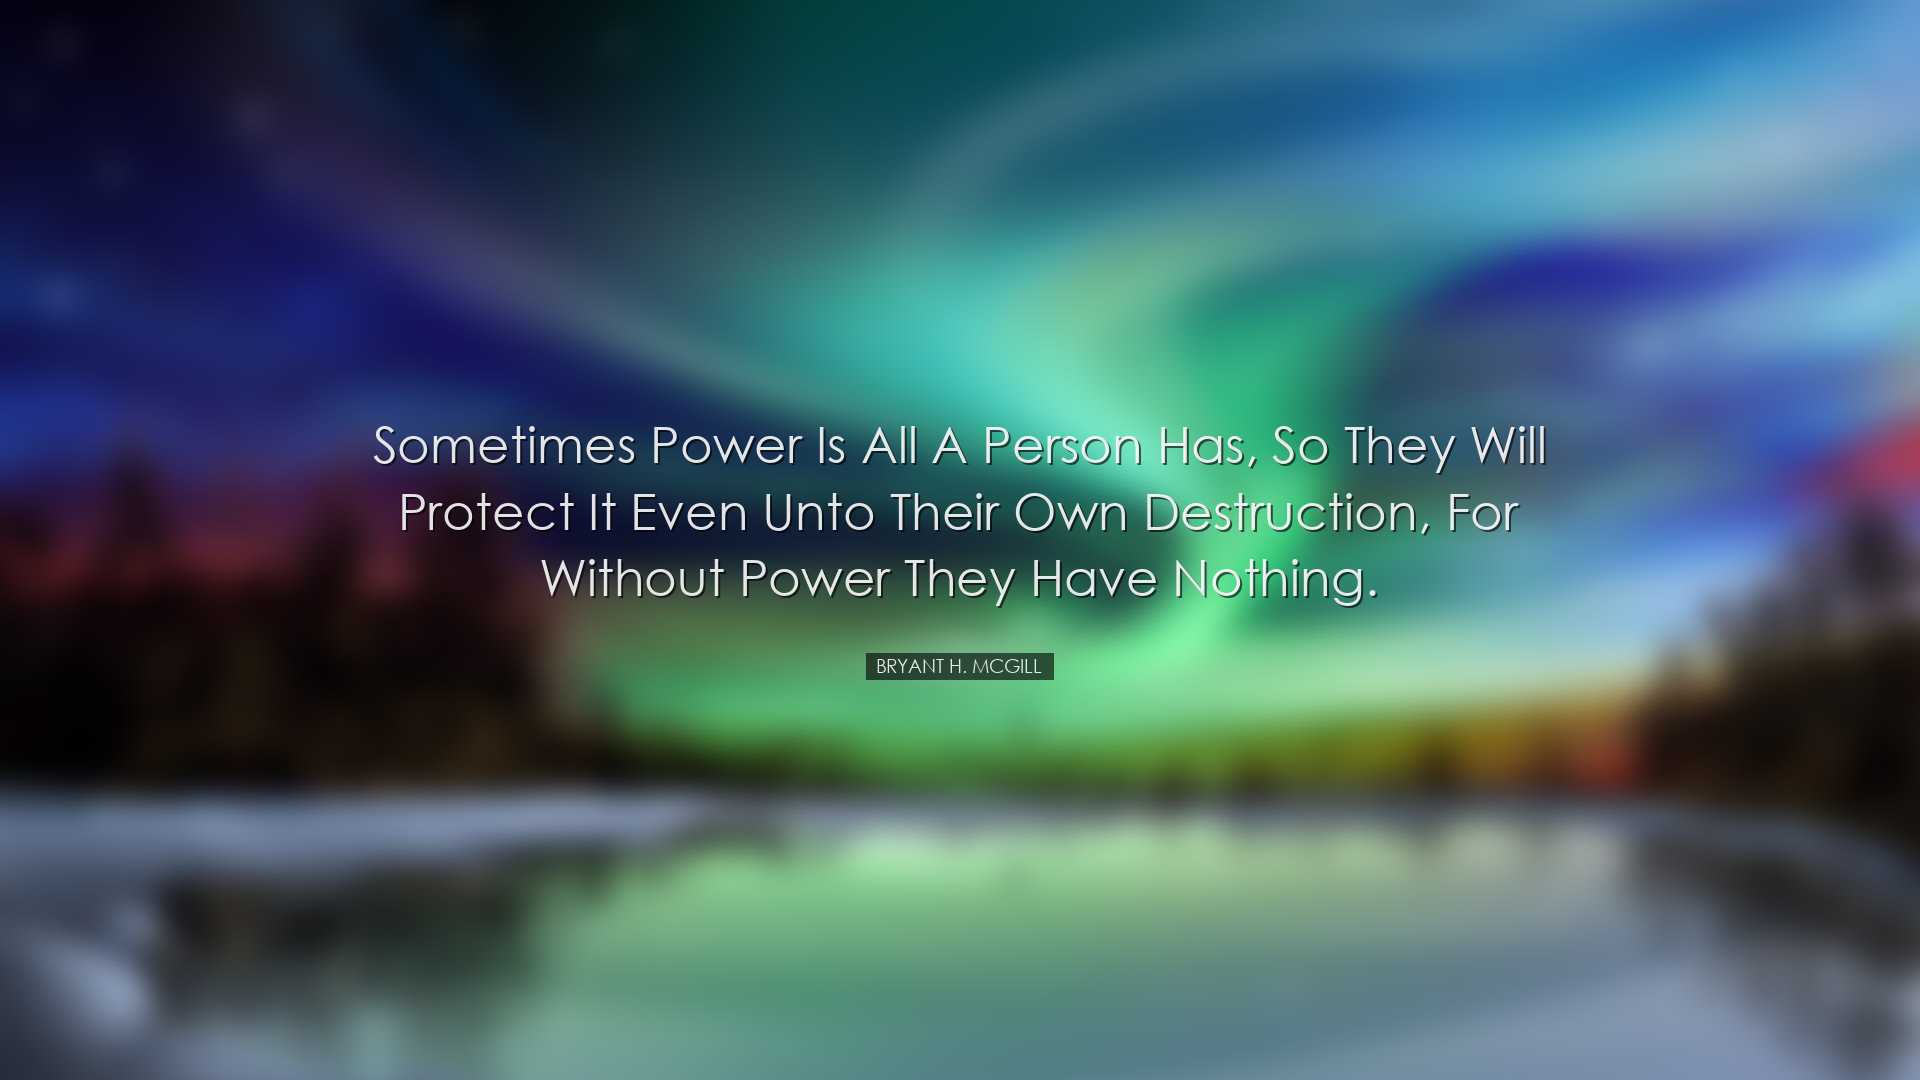 Sometimes power is all a person has, so they will protect it even